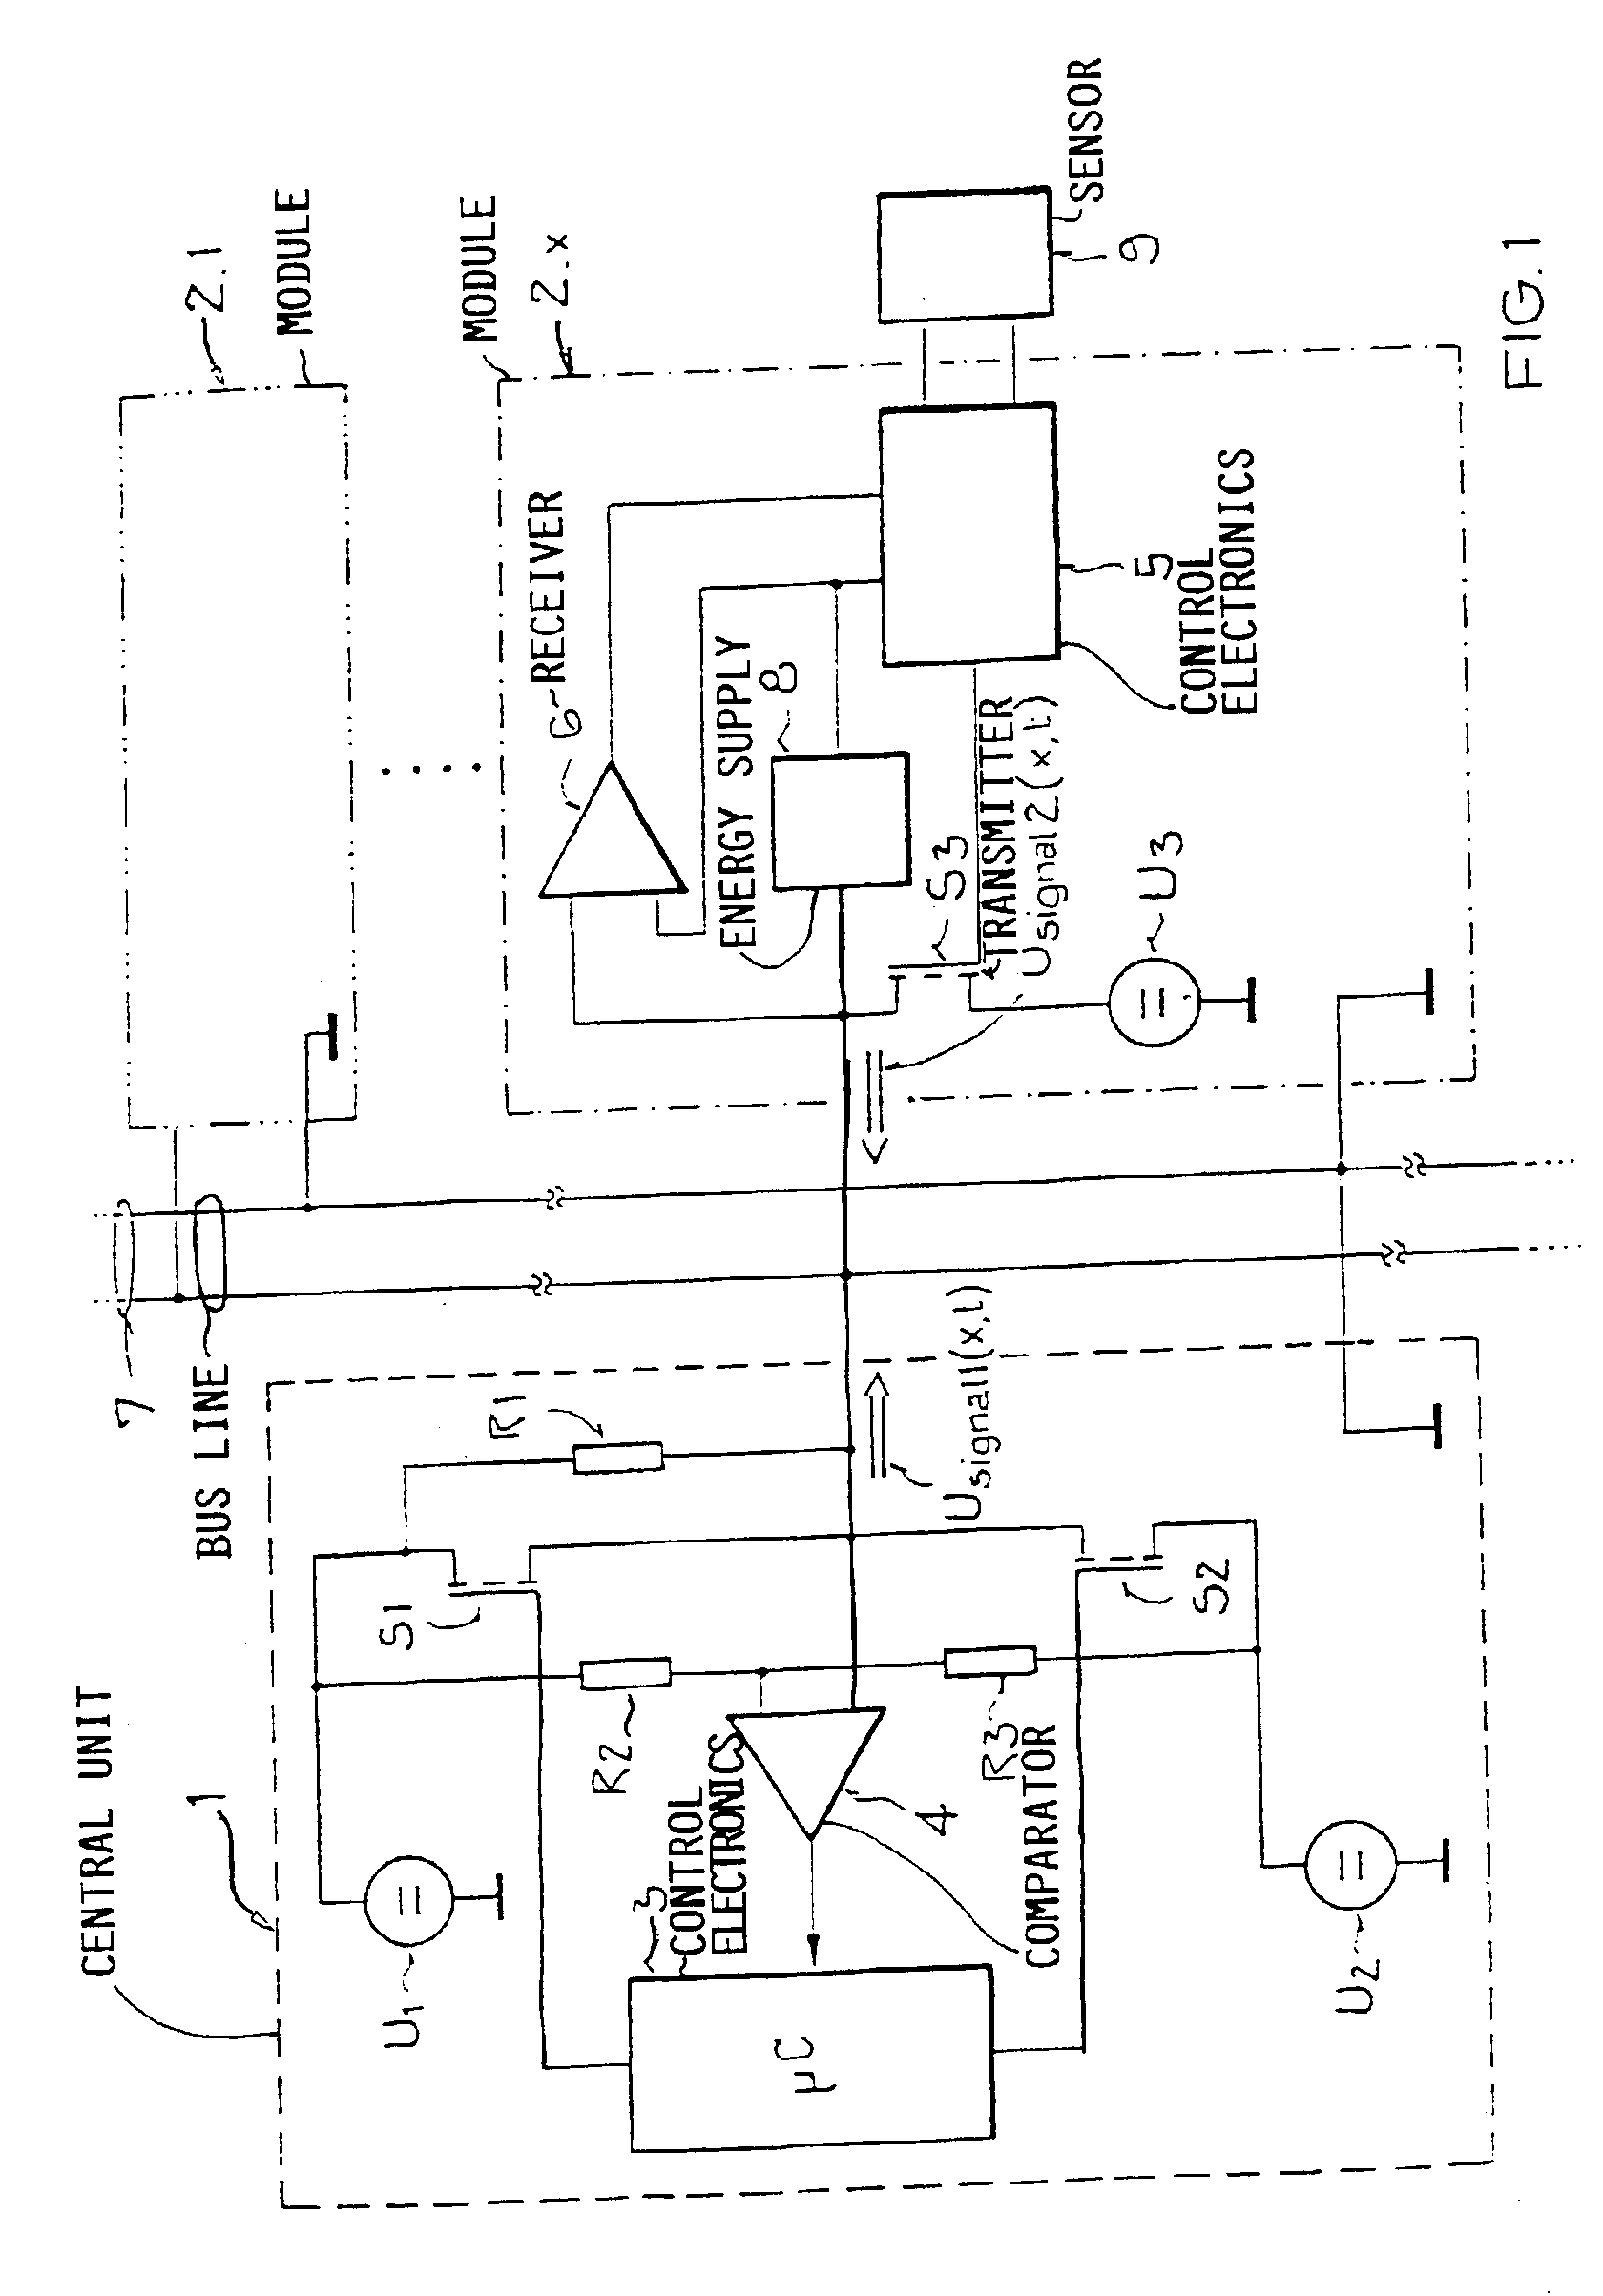 Method for the transmission of signals in a bus system, superposed on a direct supply voltage